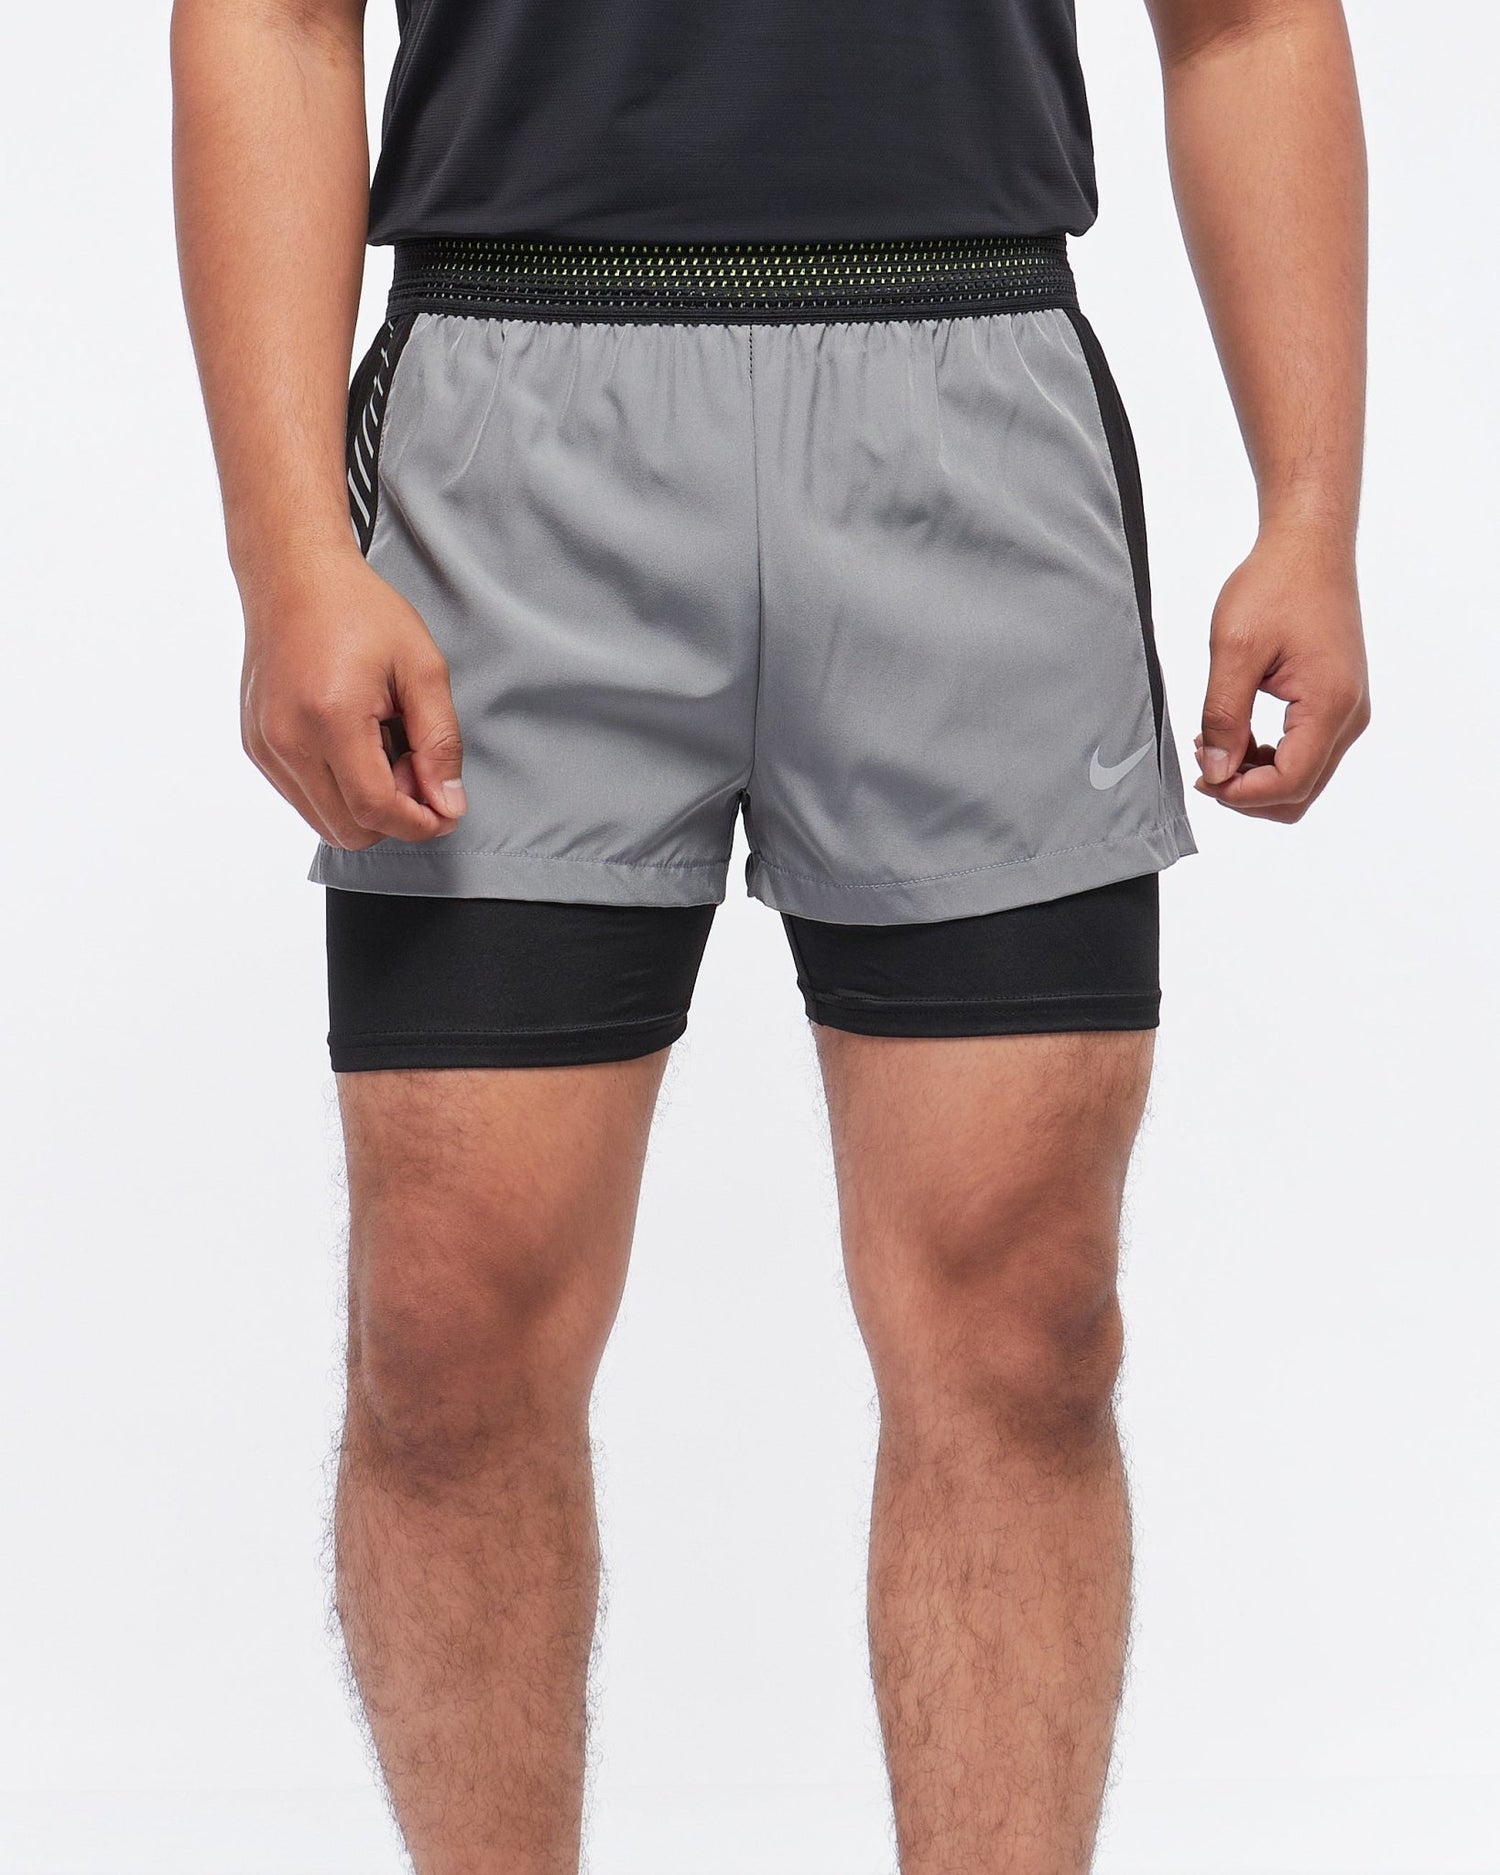 MOI OUTFIT-Color Block 2 in 1 Men Sport Shorts 13.90